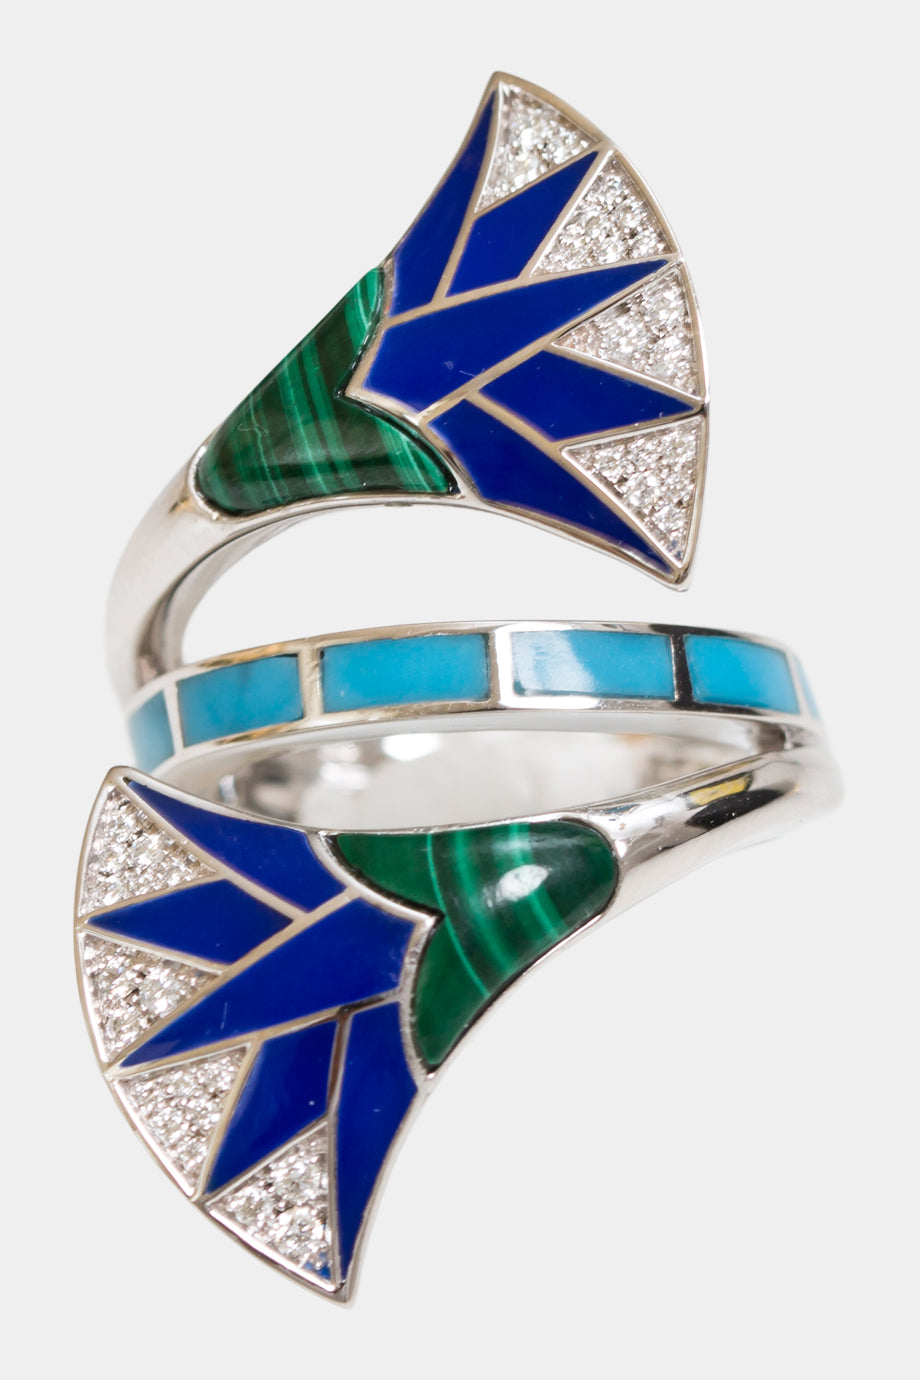 The Lotus Ring With Malachite and Enamel Accents